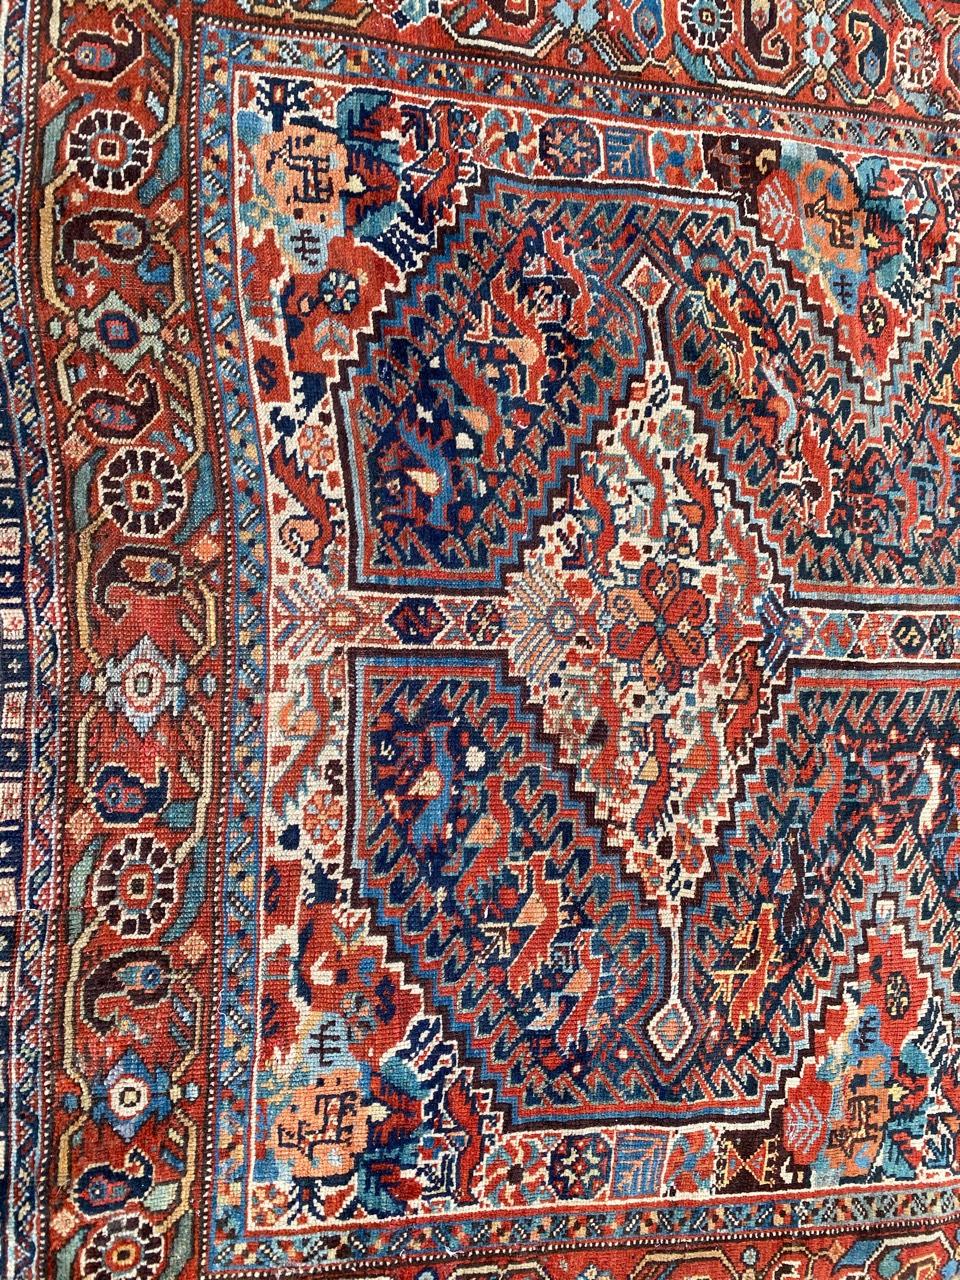 Very beautiful late 19th century rug with nice tribal geometrical design and beautiful natural colors with blue, red, yellow, green and orange, entirely hand knotted with wool velvet on wool foundation.

✨✨✨
